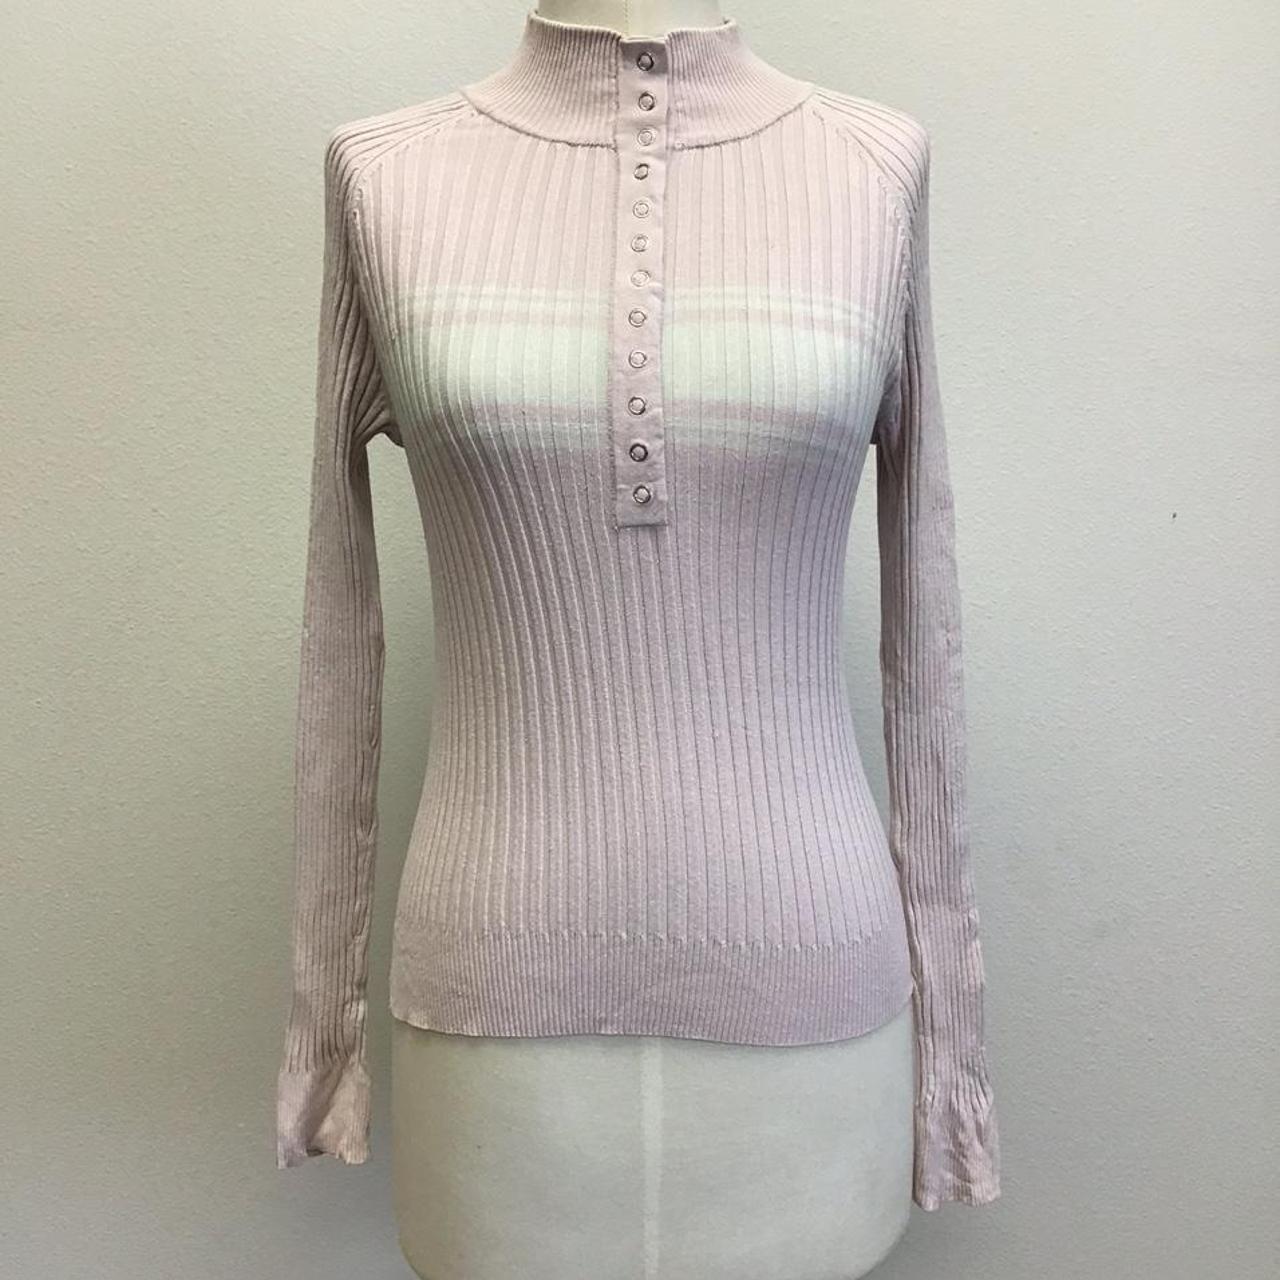 Massimo Dutti Women's Pink and White Jumper | Depop